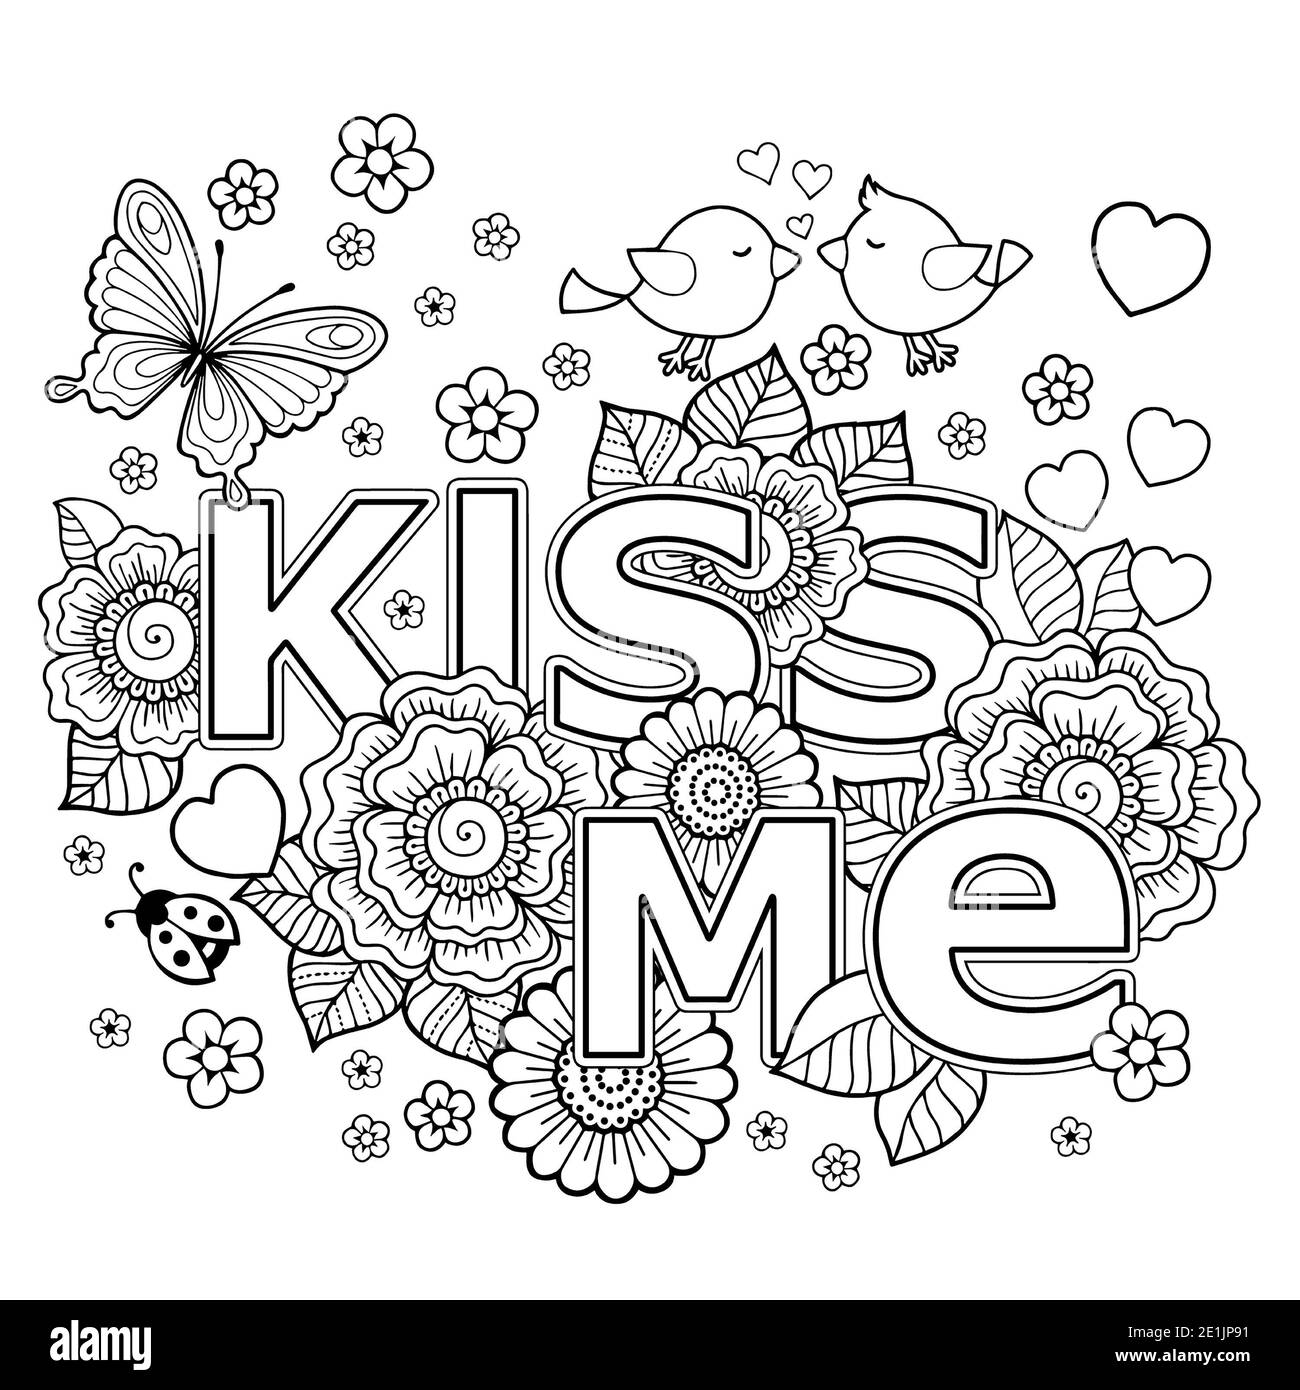 Vector coloring book for adult design for wedding invitations and valentines day of abstract flowers hearts envelope arrow heart bird kiss bu stock photo